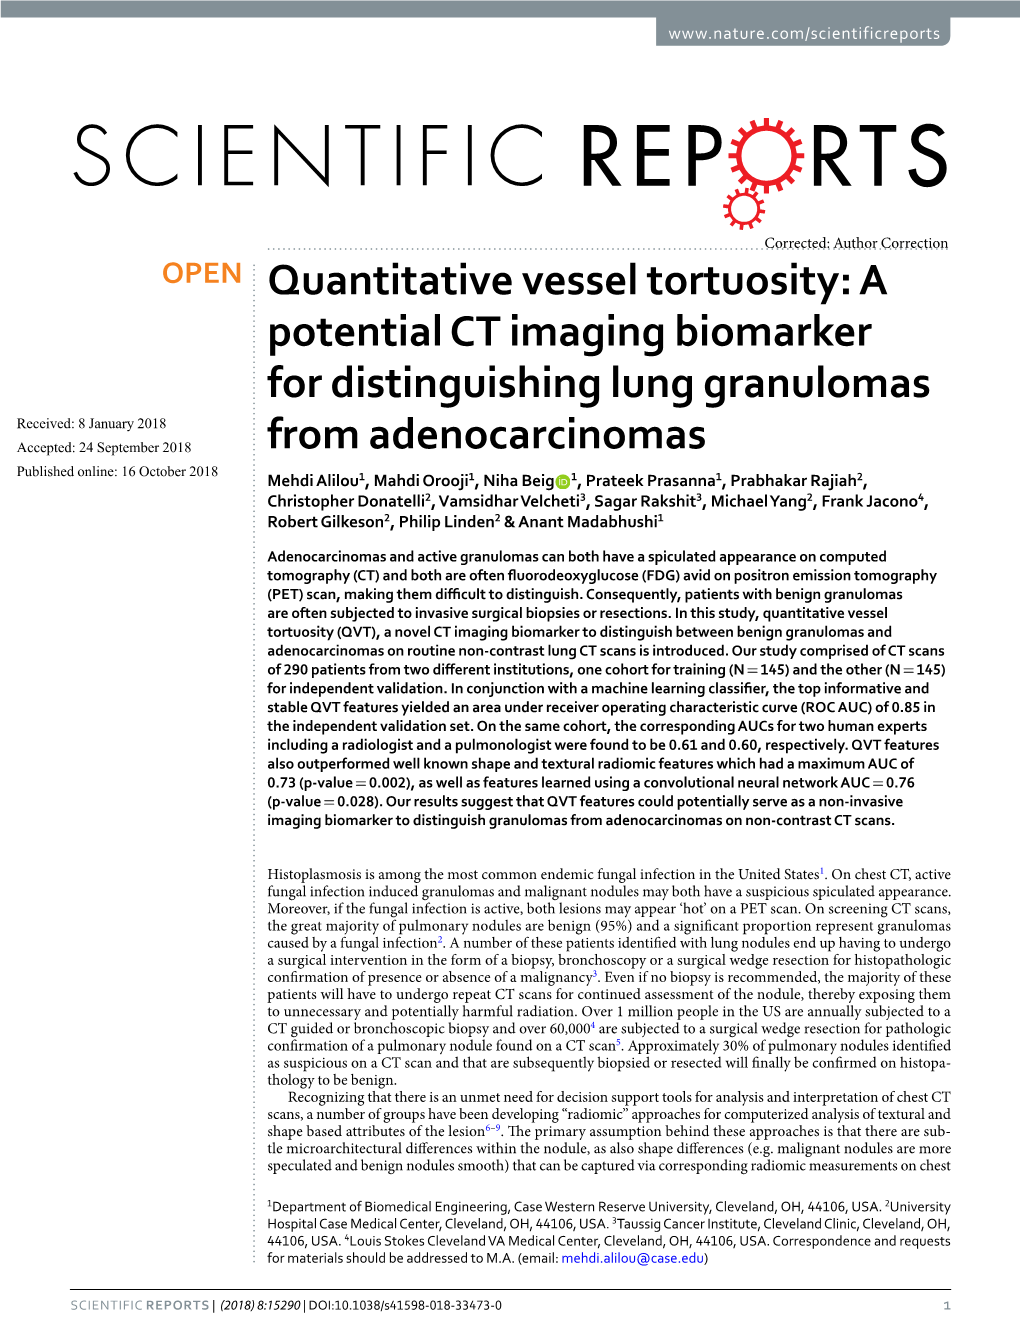 A Potential CT Imaging Biomarker for Distinguishing Lung